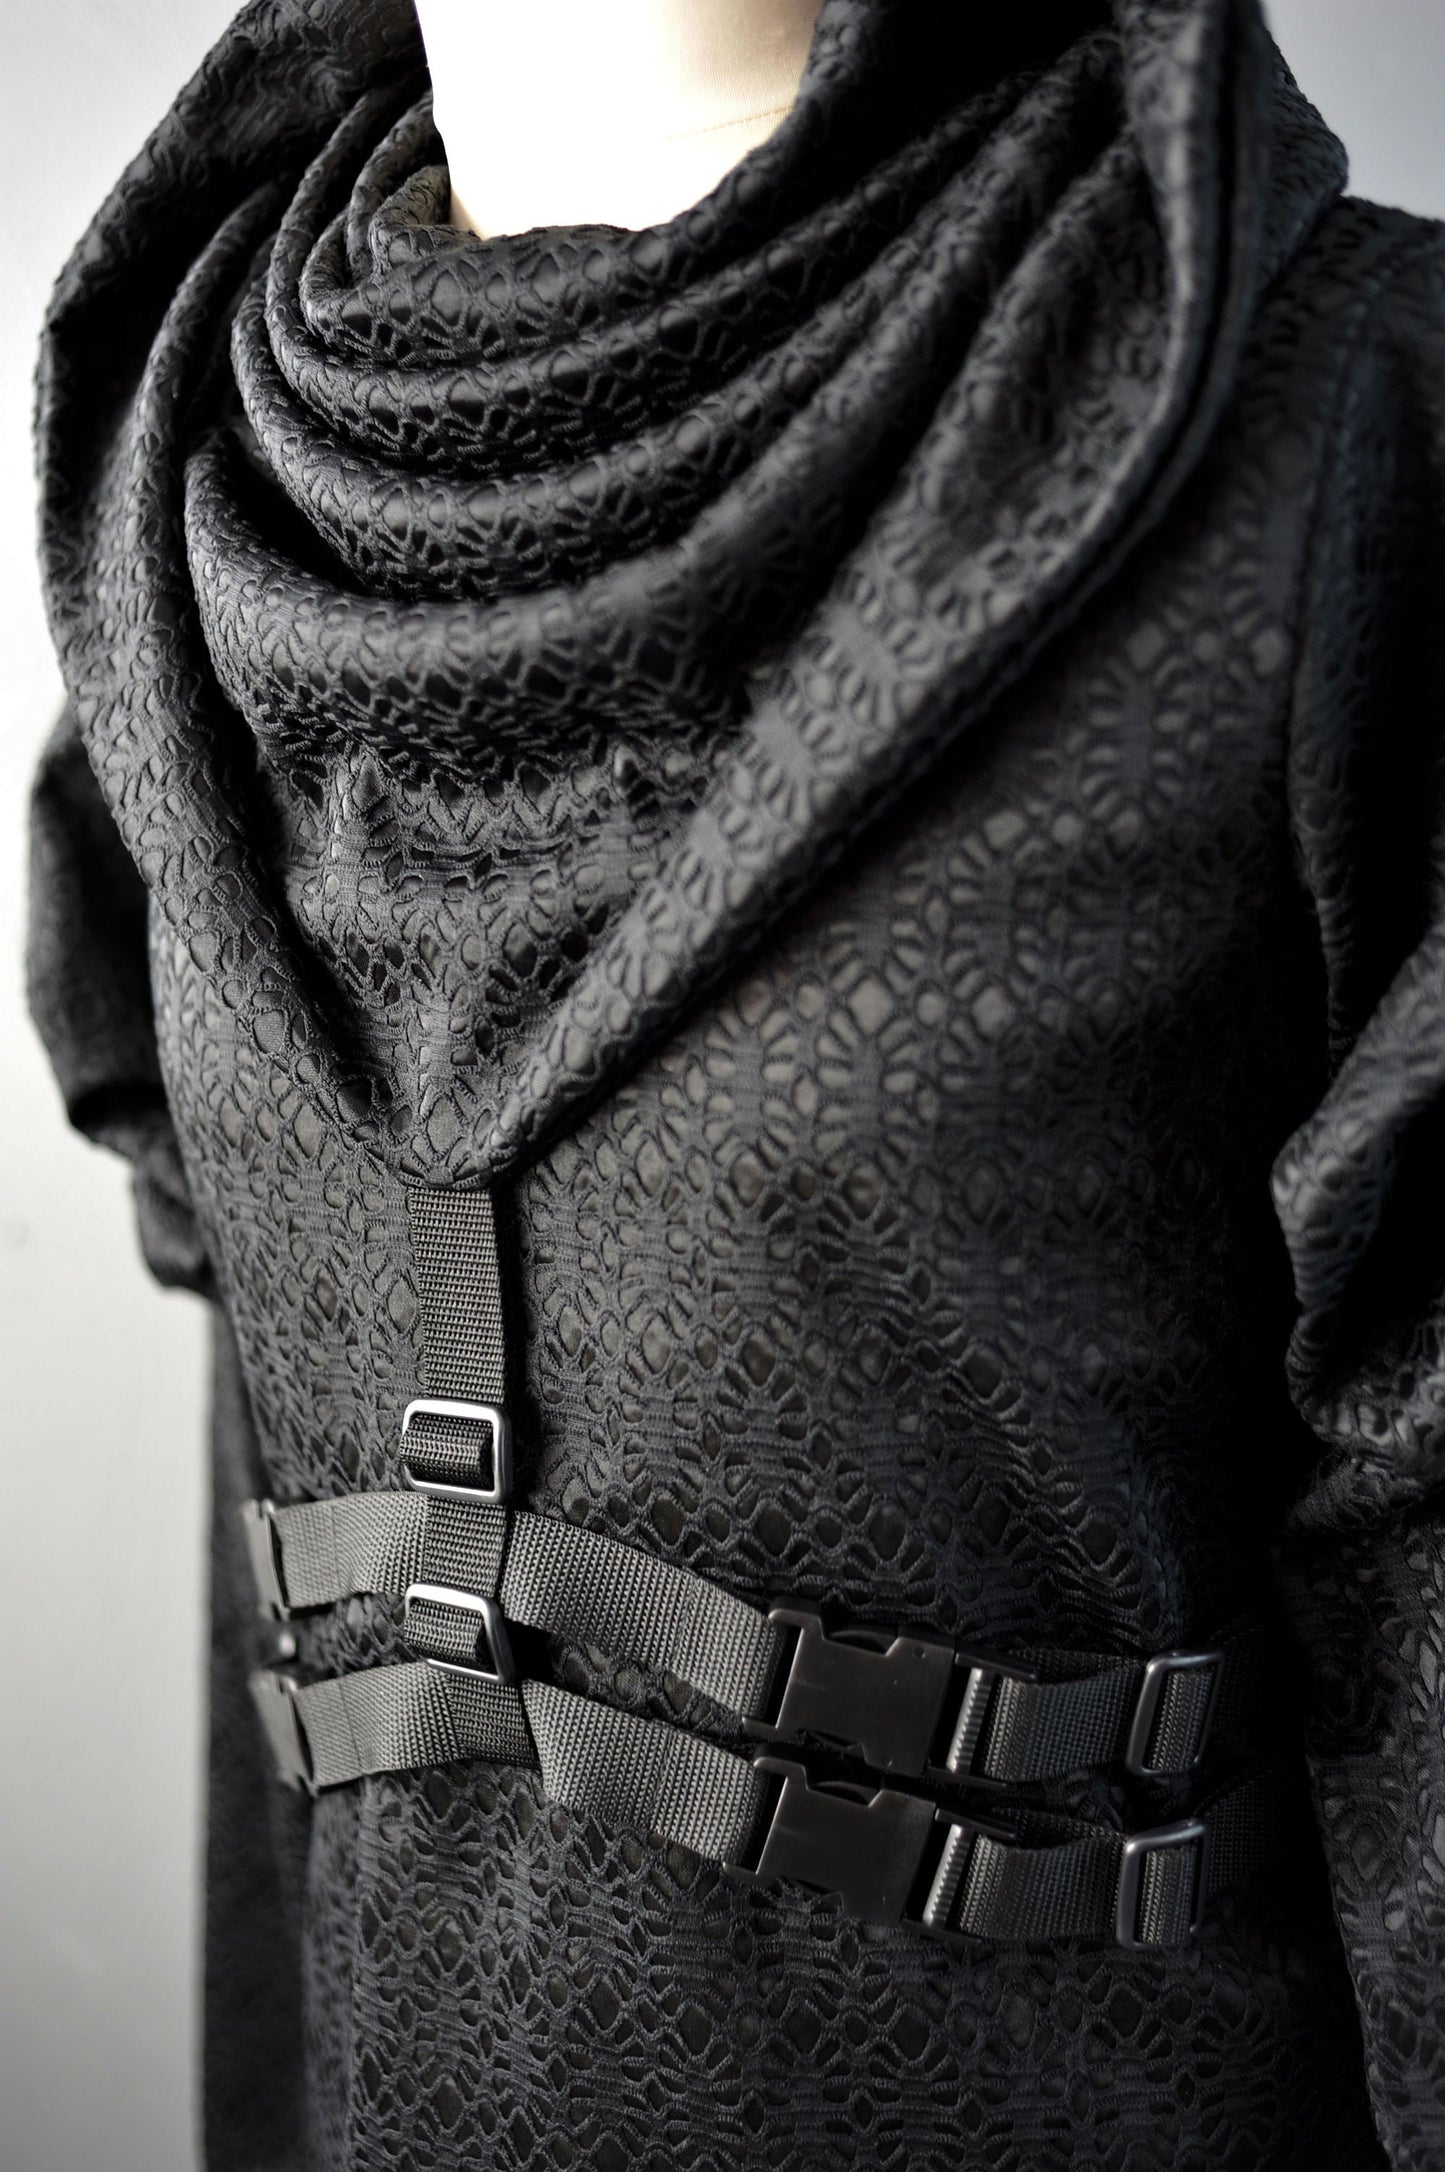 Cyberpunk Hooded Cowl Neck Top, Futuristic Hoodie with Buckles Straps S to XL